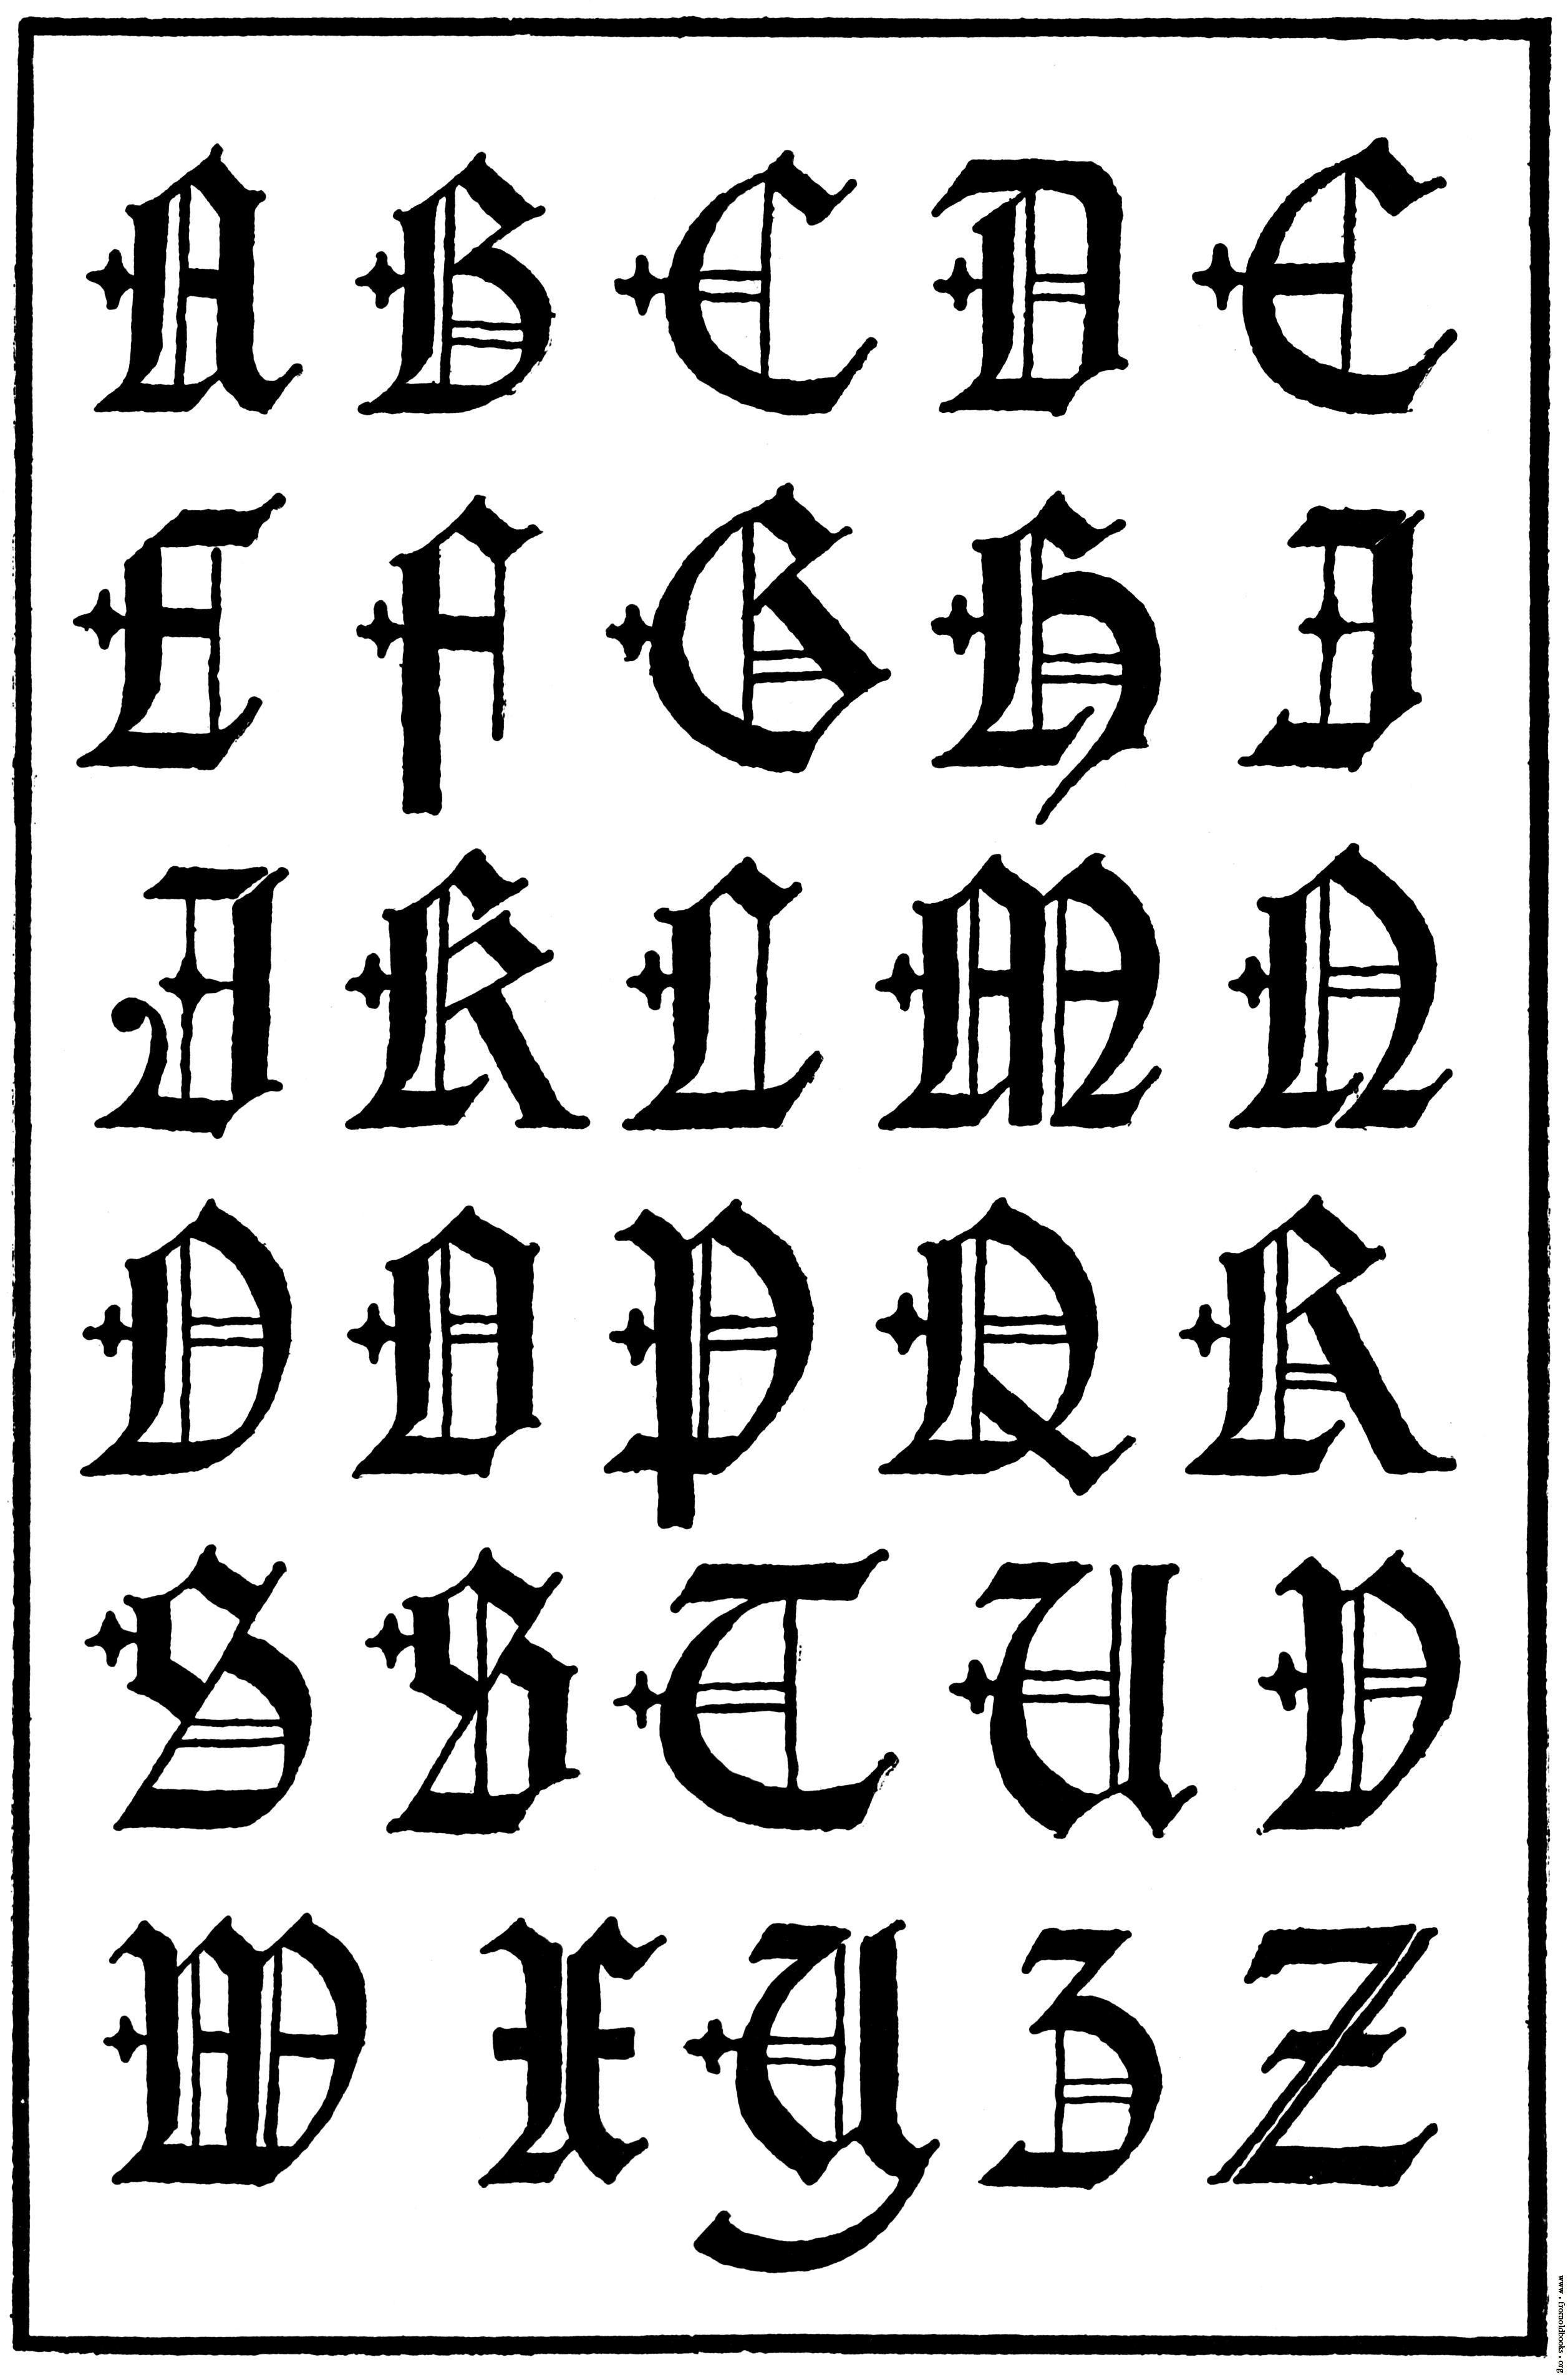 Old english writing alphabet letters